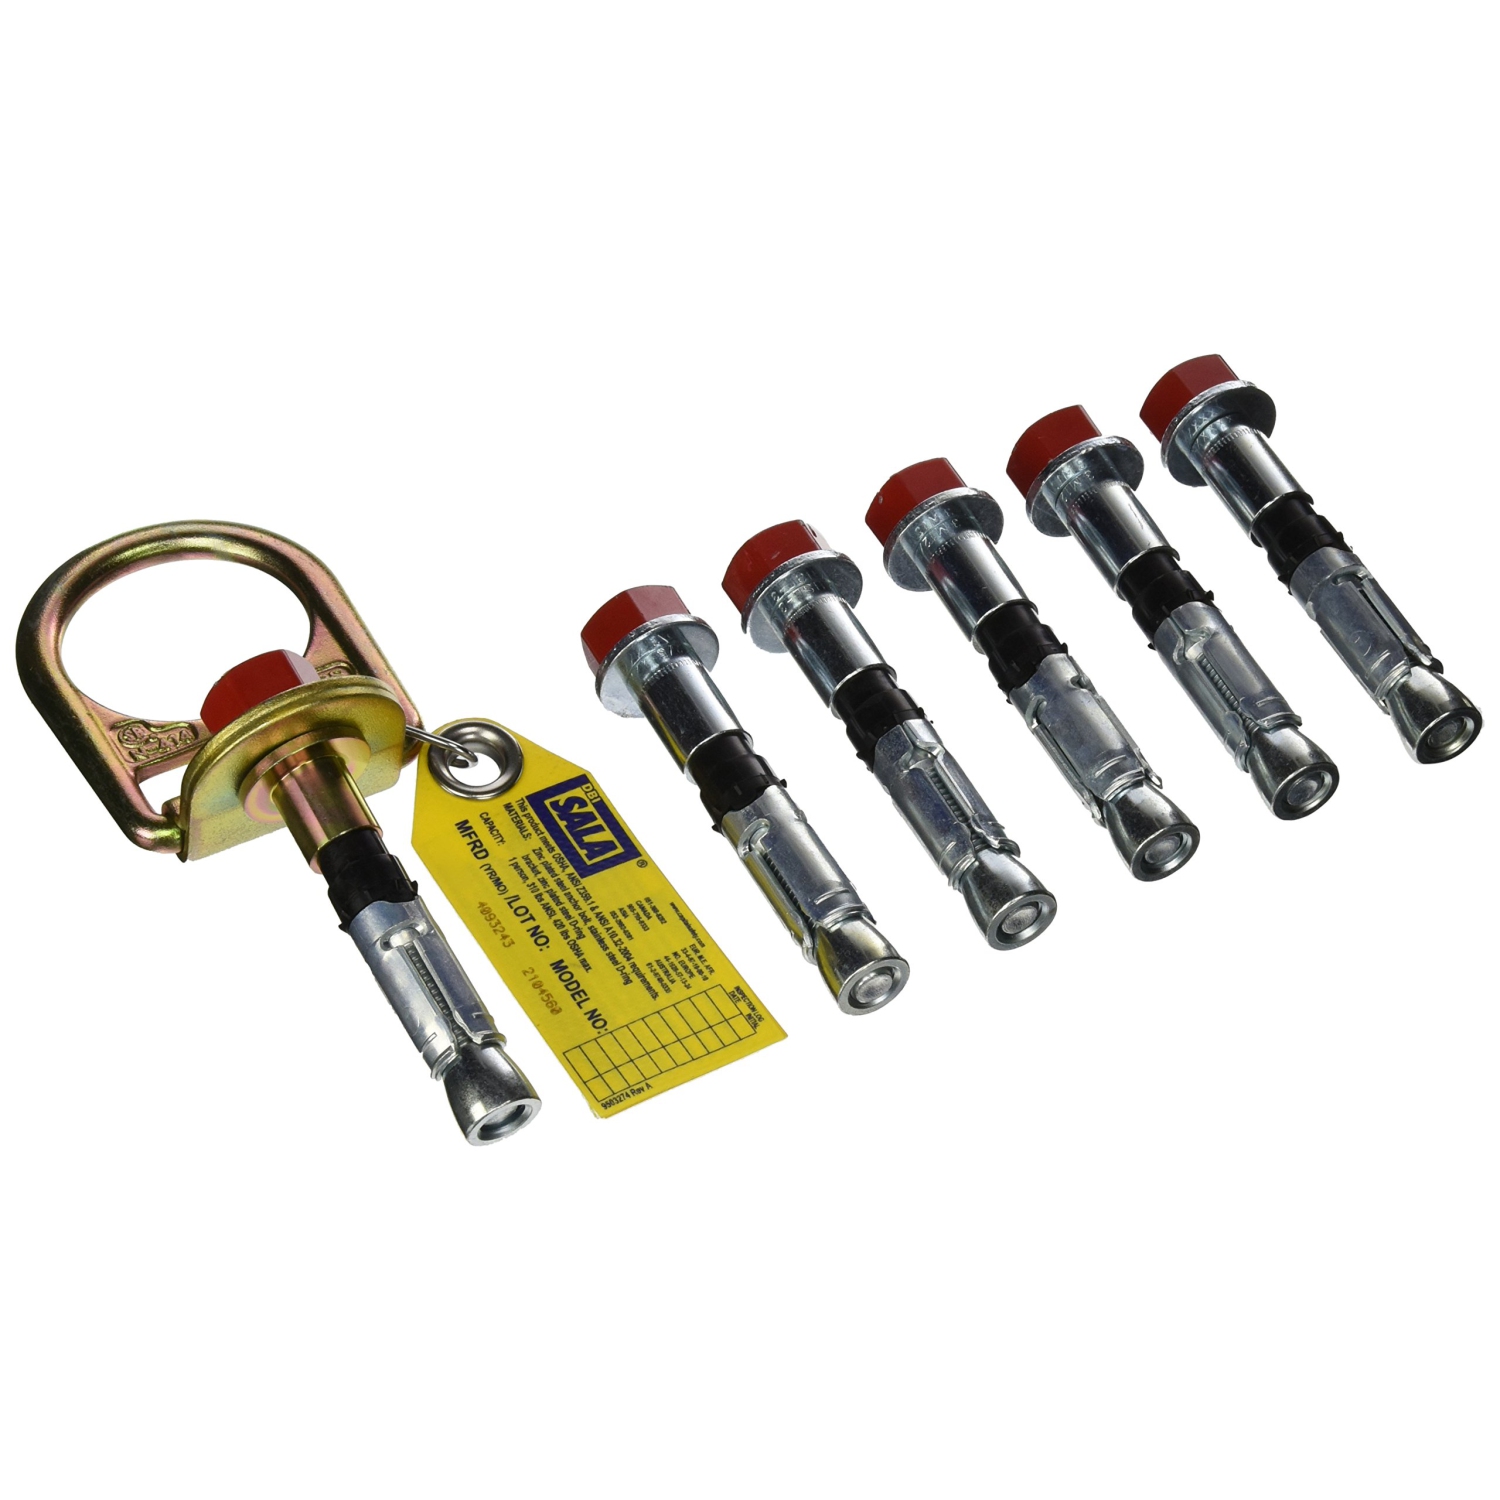 3M DBI-SALA 2104561 Concrete D-Ring Anchor with 5 Additional Bolts, Gray/Gold/Red